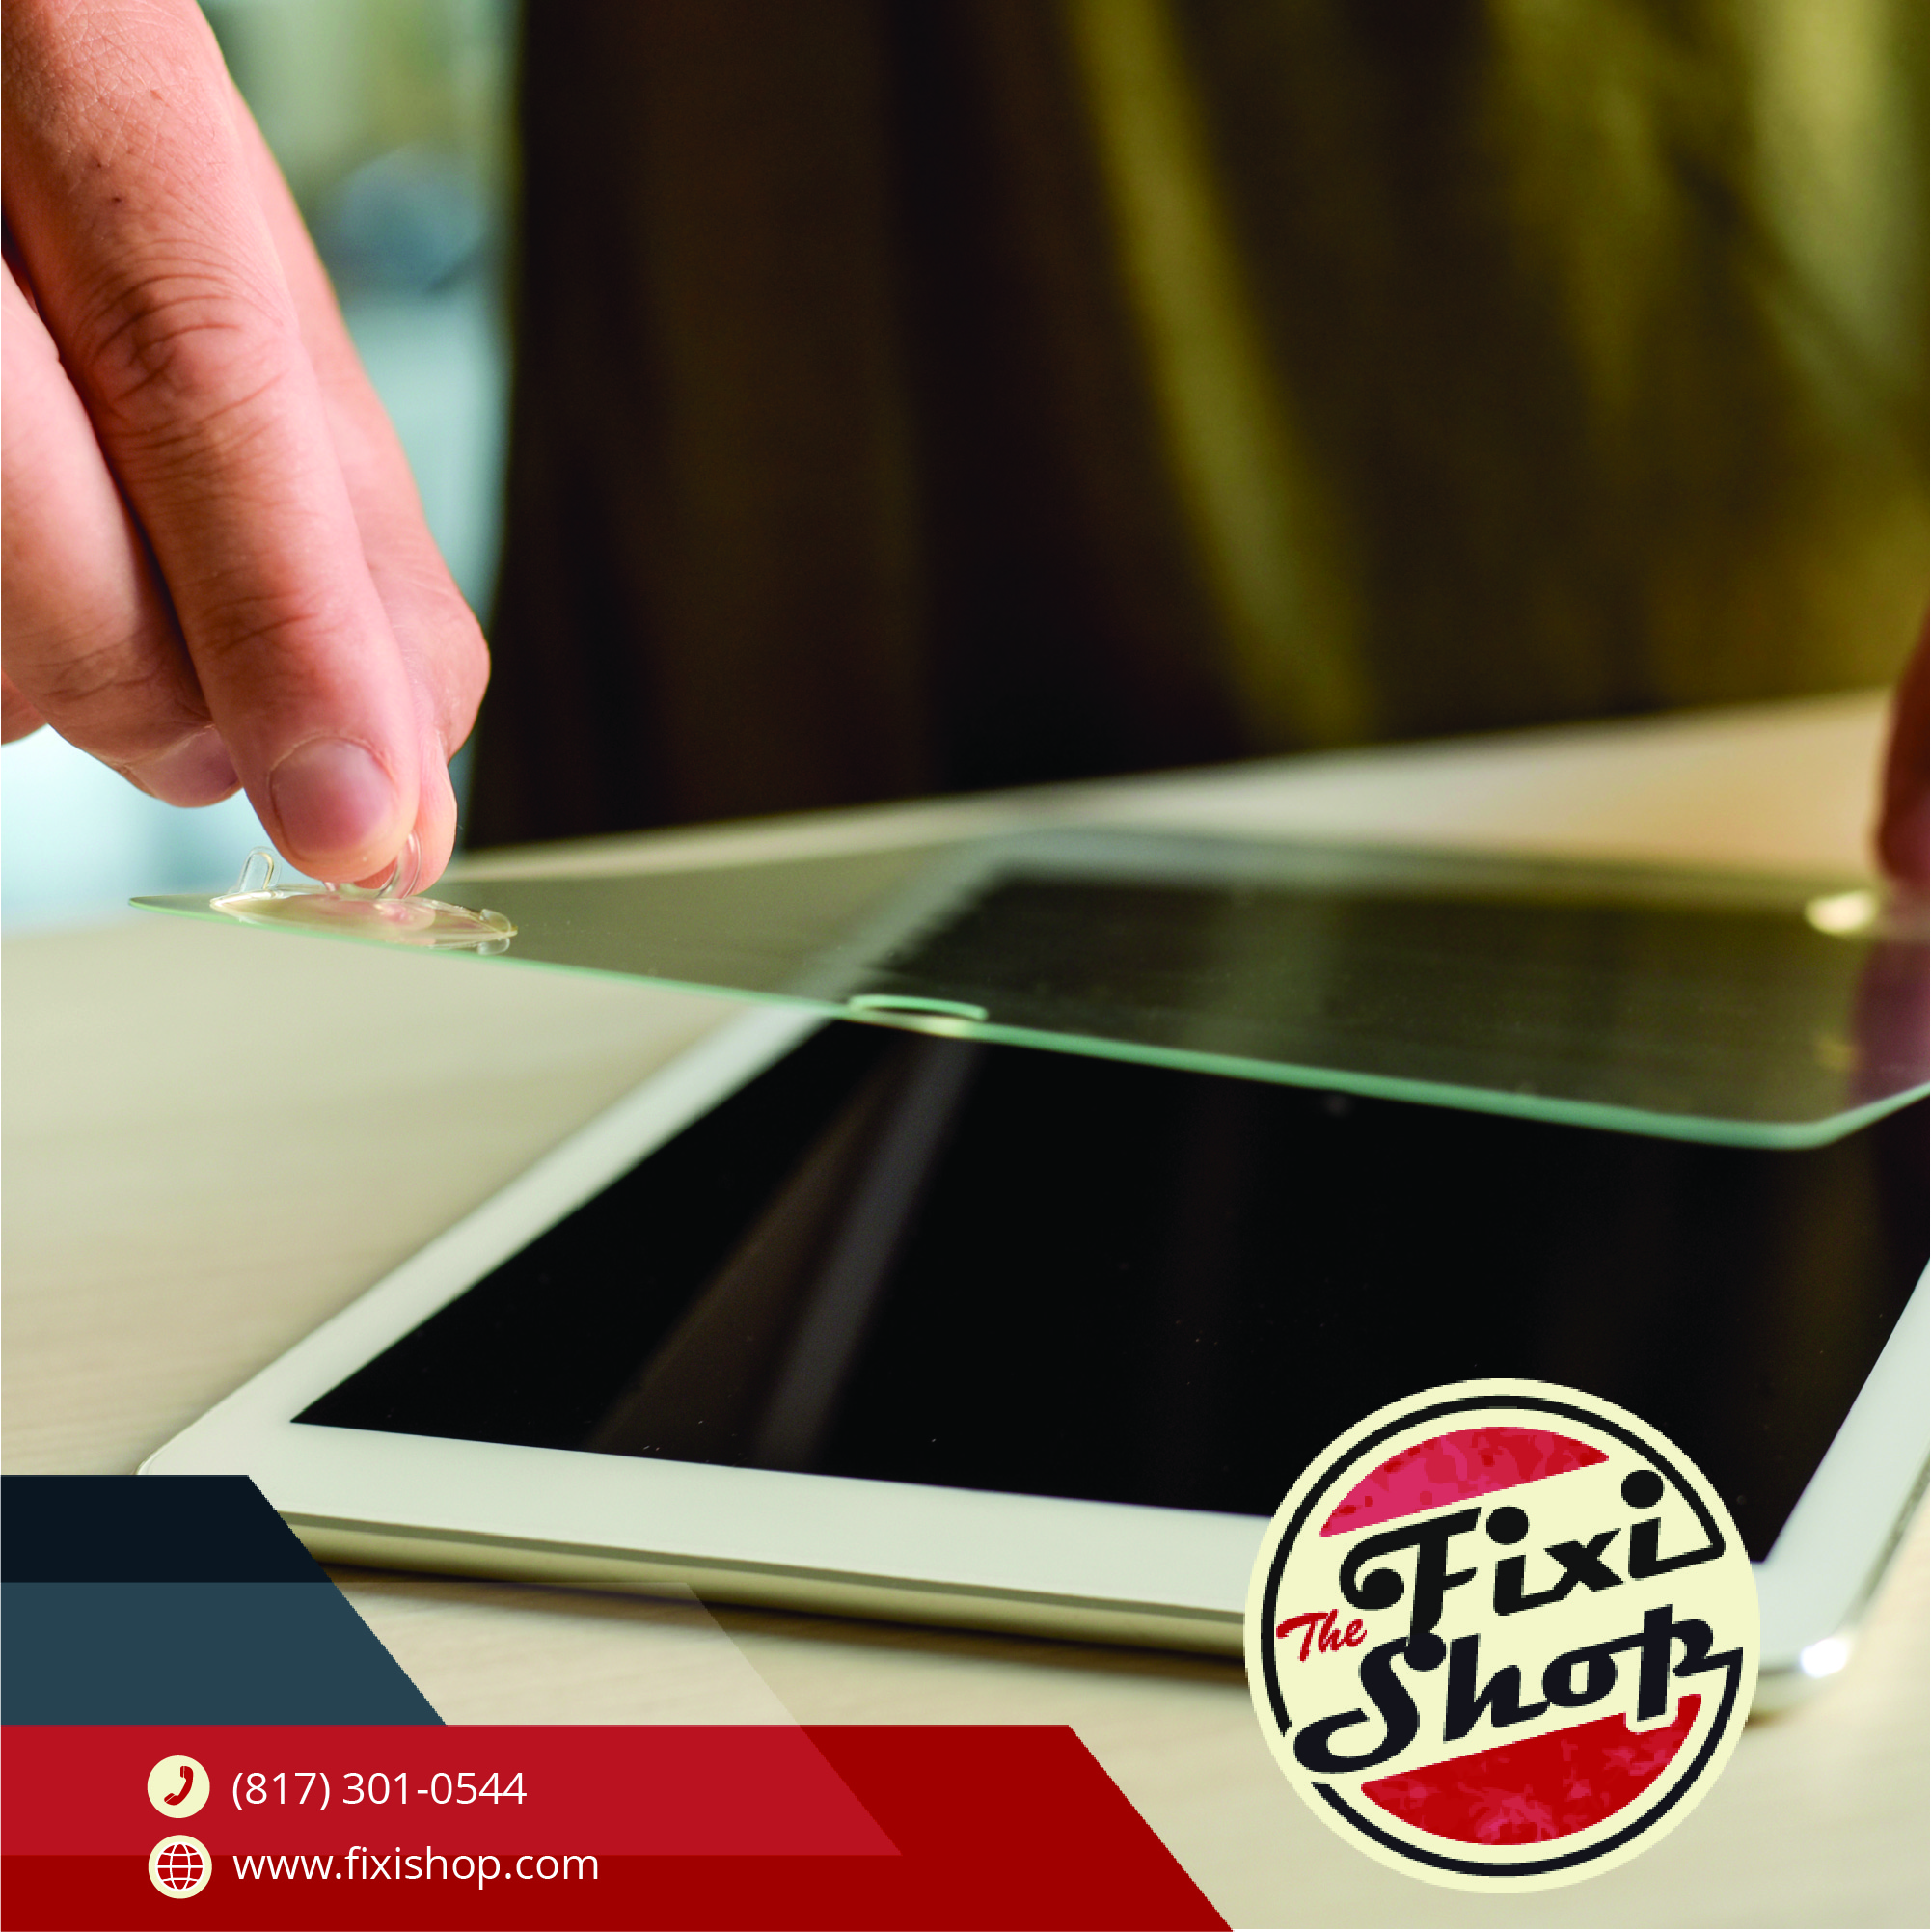 Expert iPad screen repair services at the fixi shop in Fort Worth